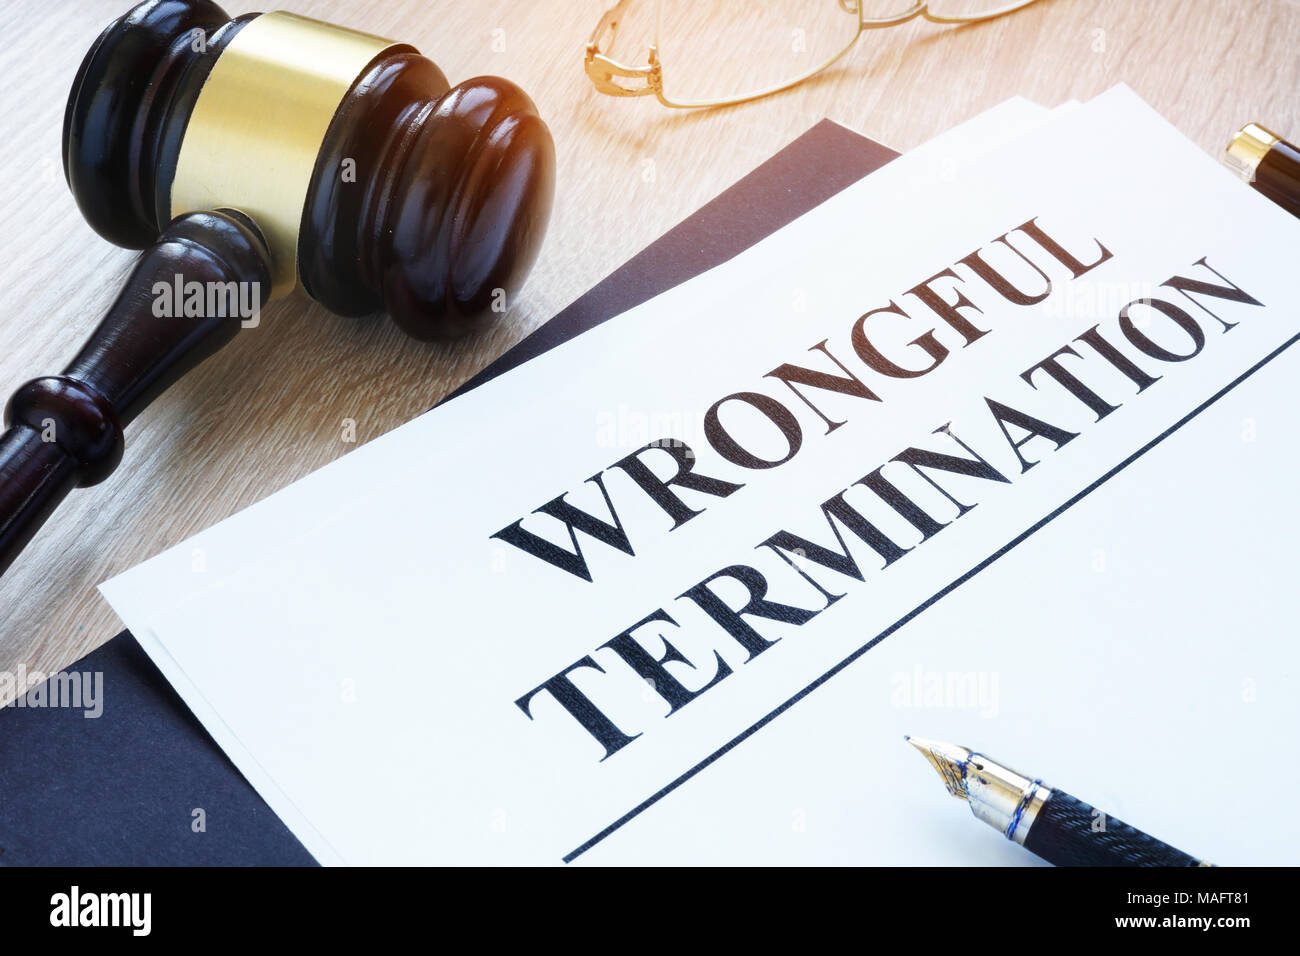 Documents about wrongful termination and gavel. Stock Photo